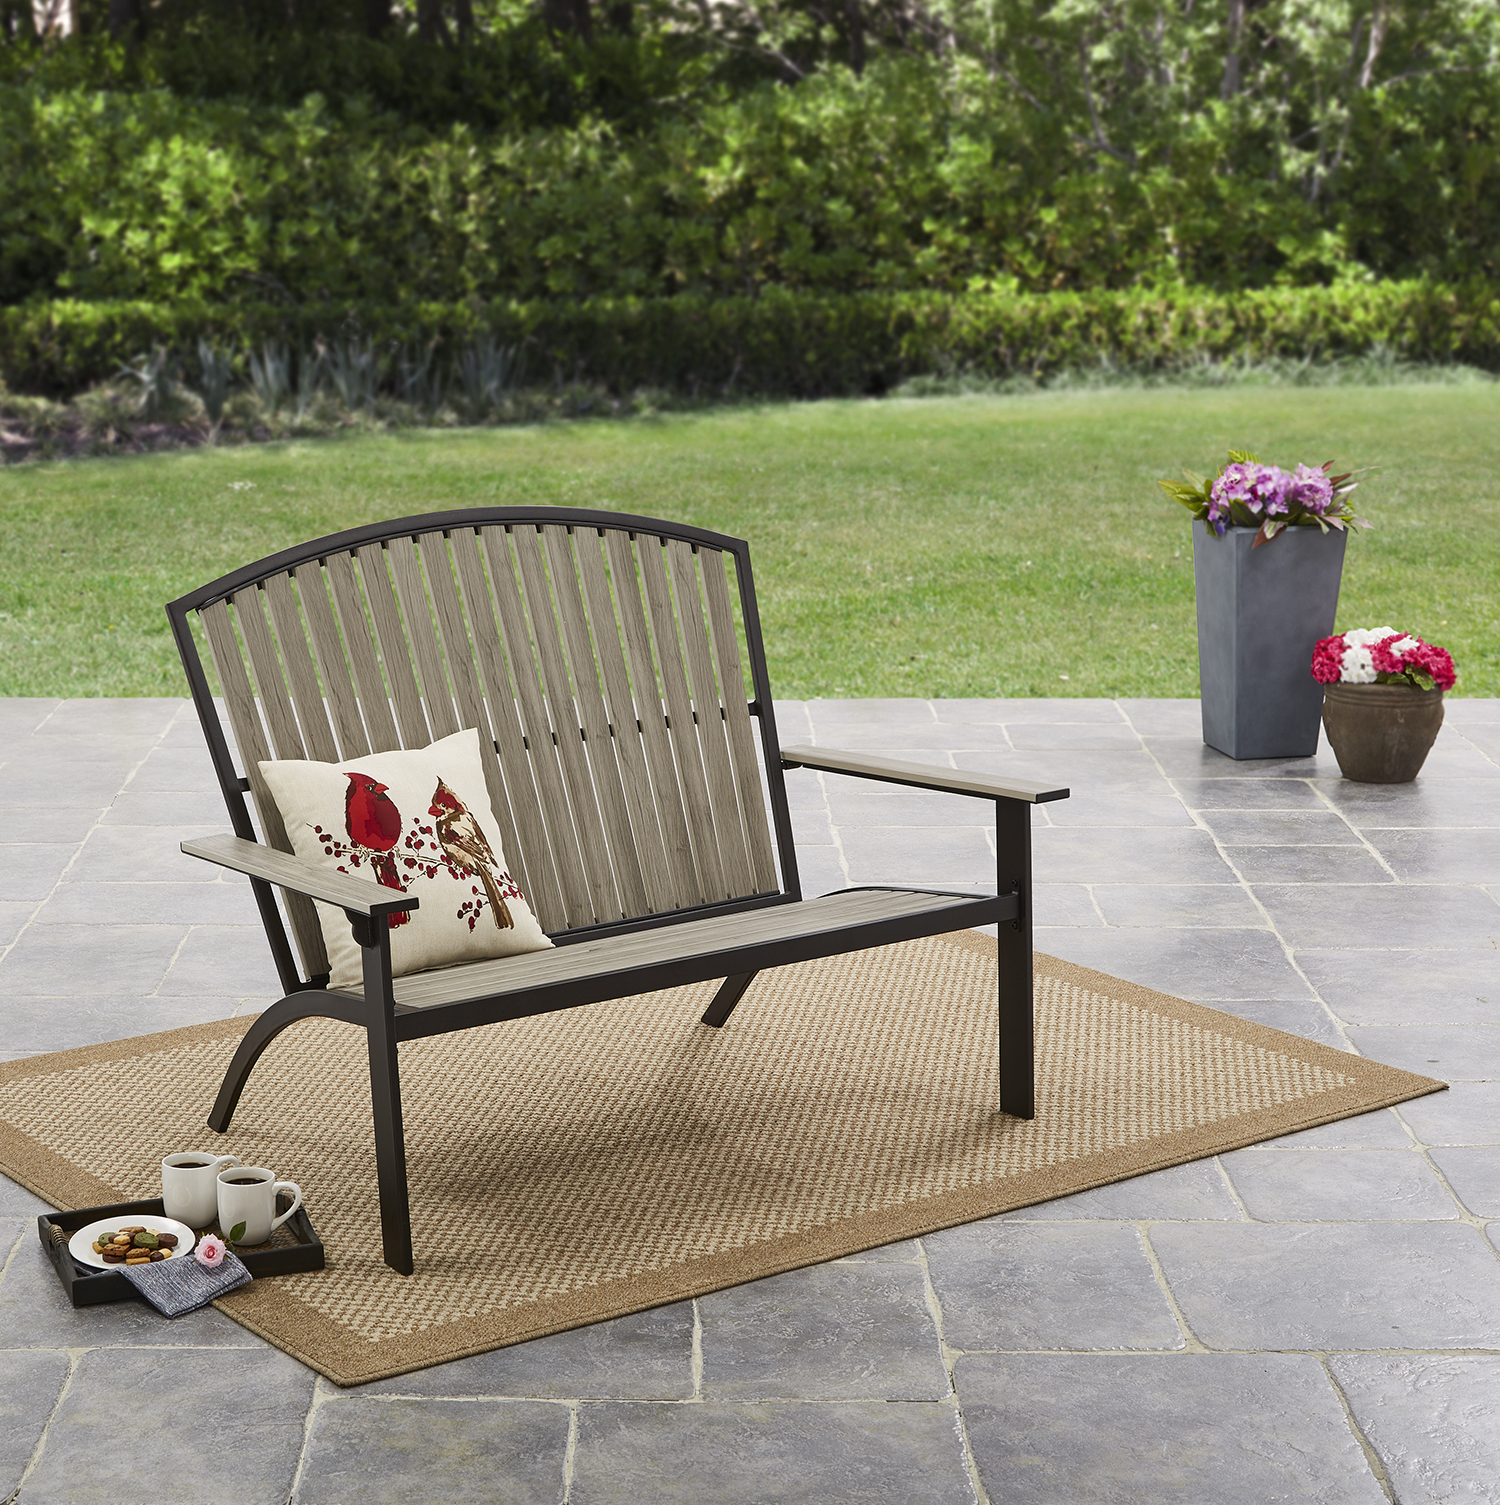 Mainstays Springview Hills Outdoor Durable Resin Bench - Gray - image 1 of 5